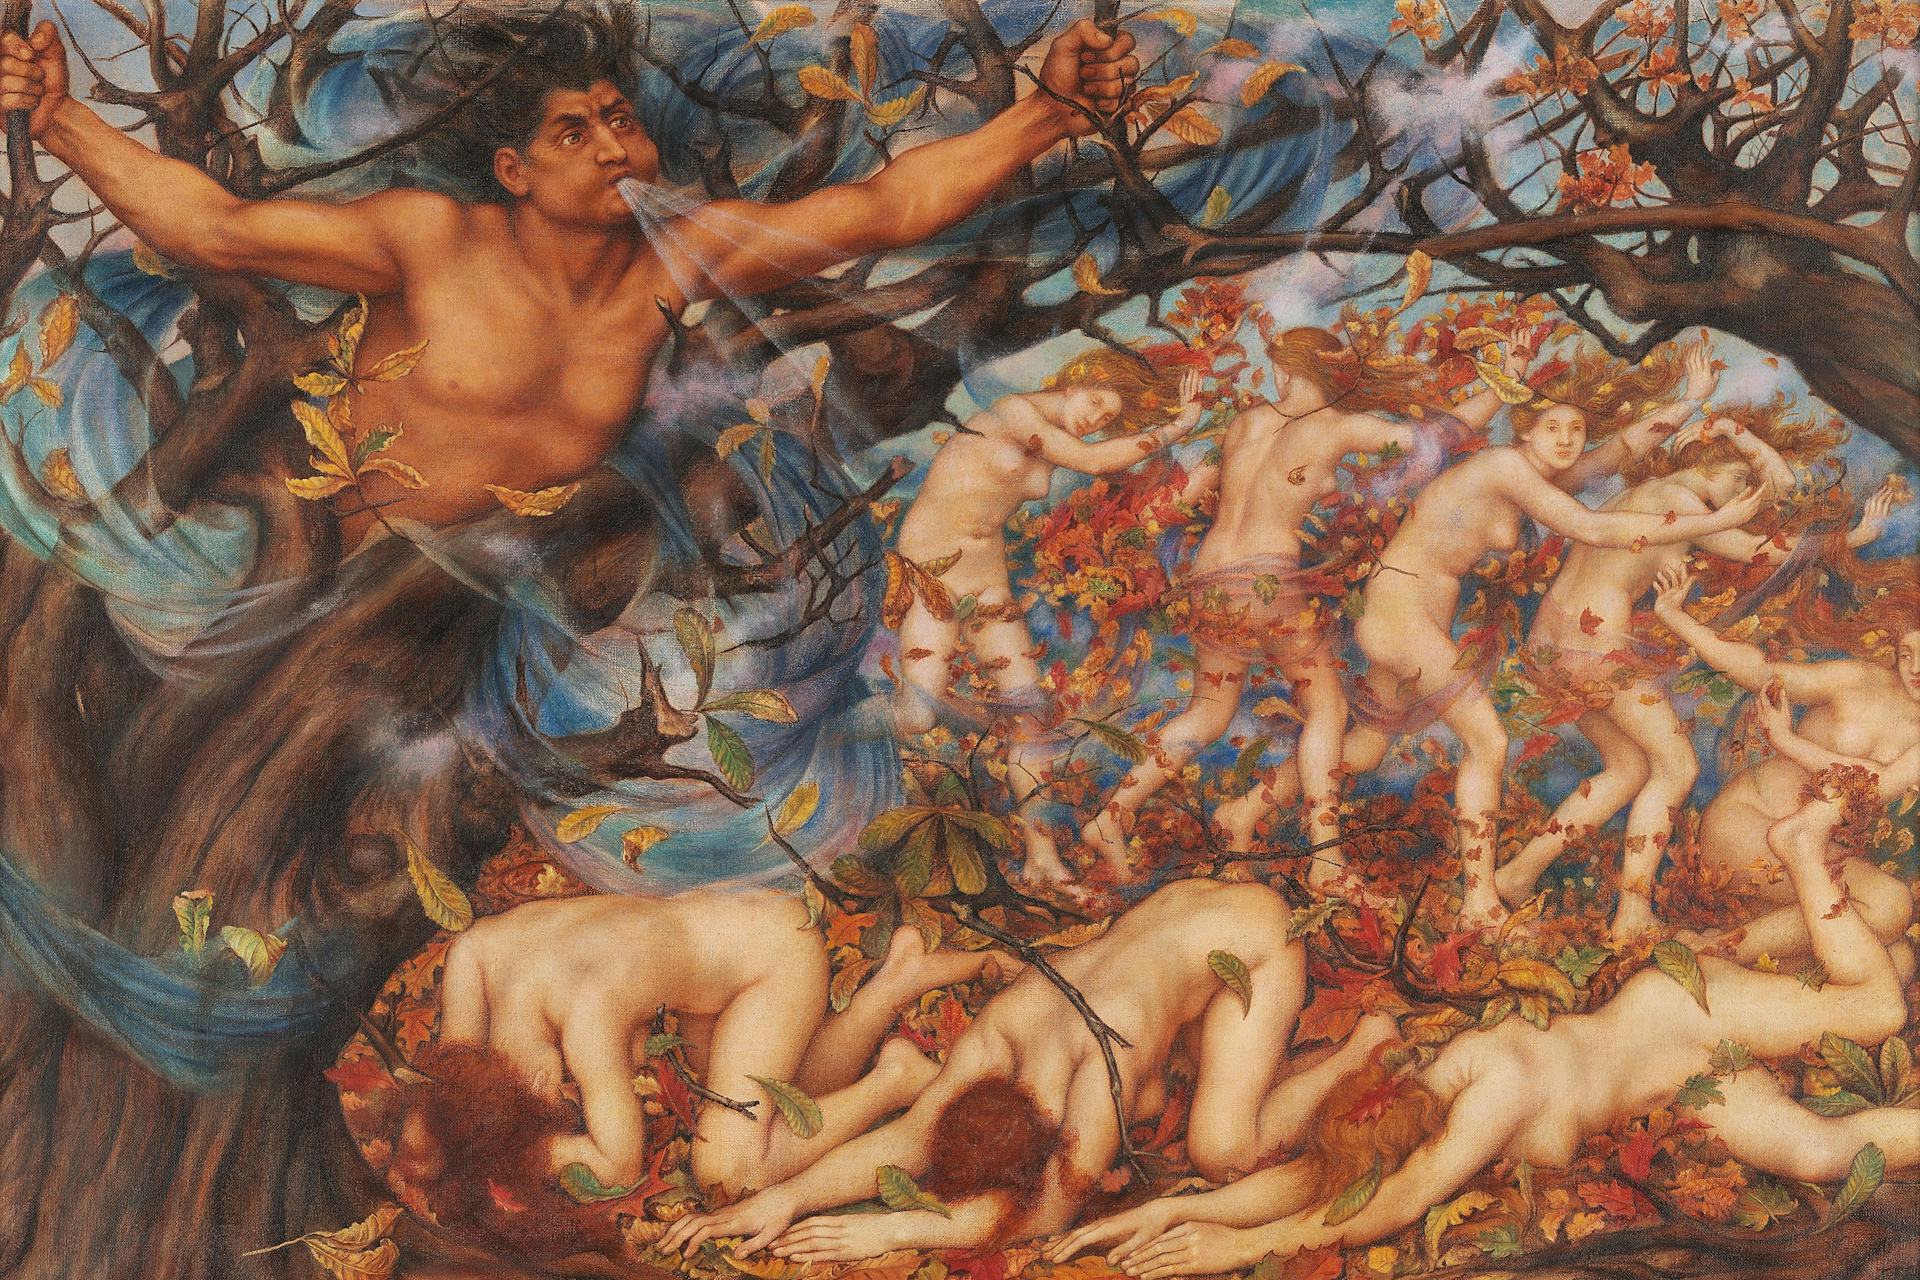 Boreas and the Fallen Leaves by Evelyn De Morgan